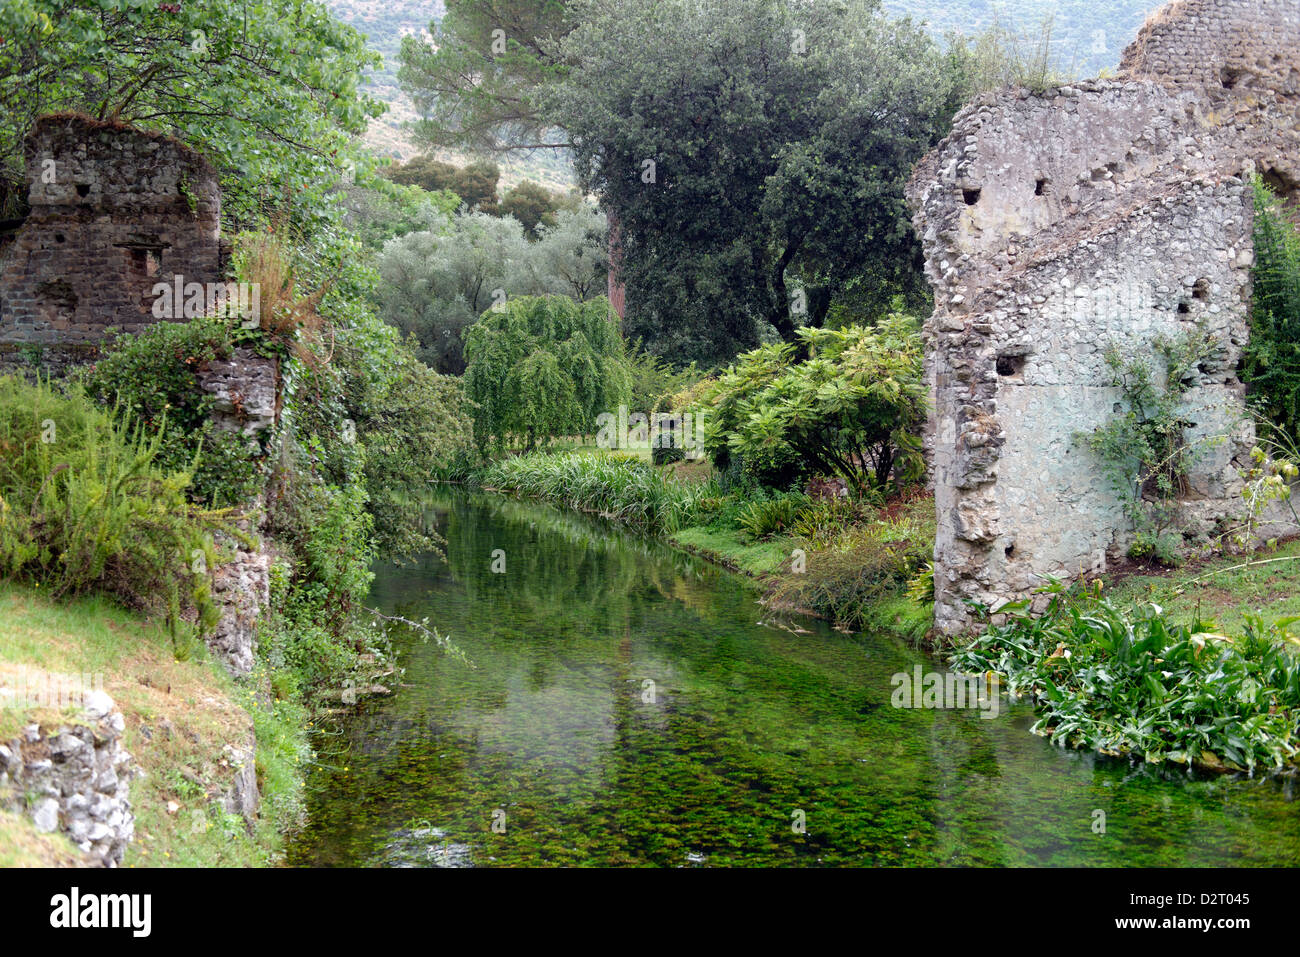 View along the romantic river and the ruins of the medieval village. Garden of Ninfa. Lazio. Italy. Stock Photo